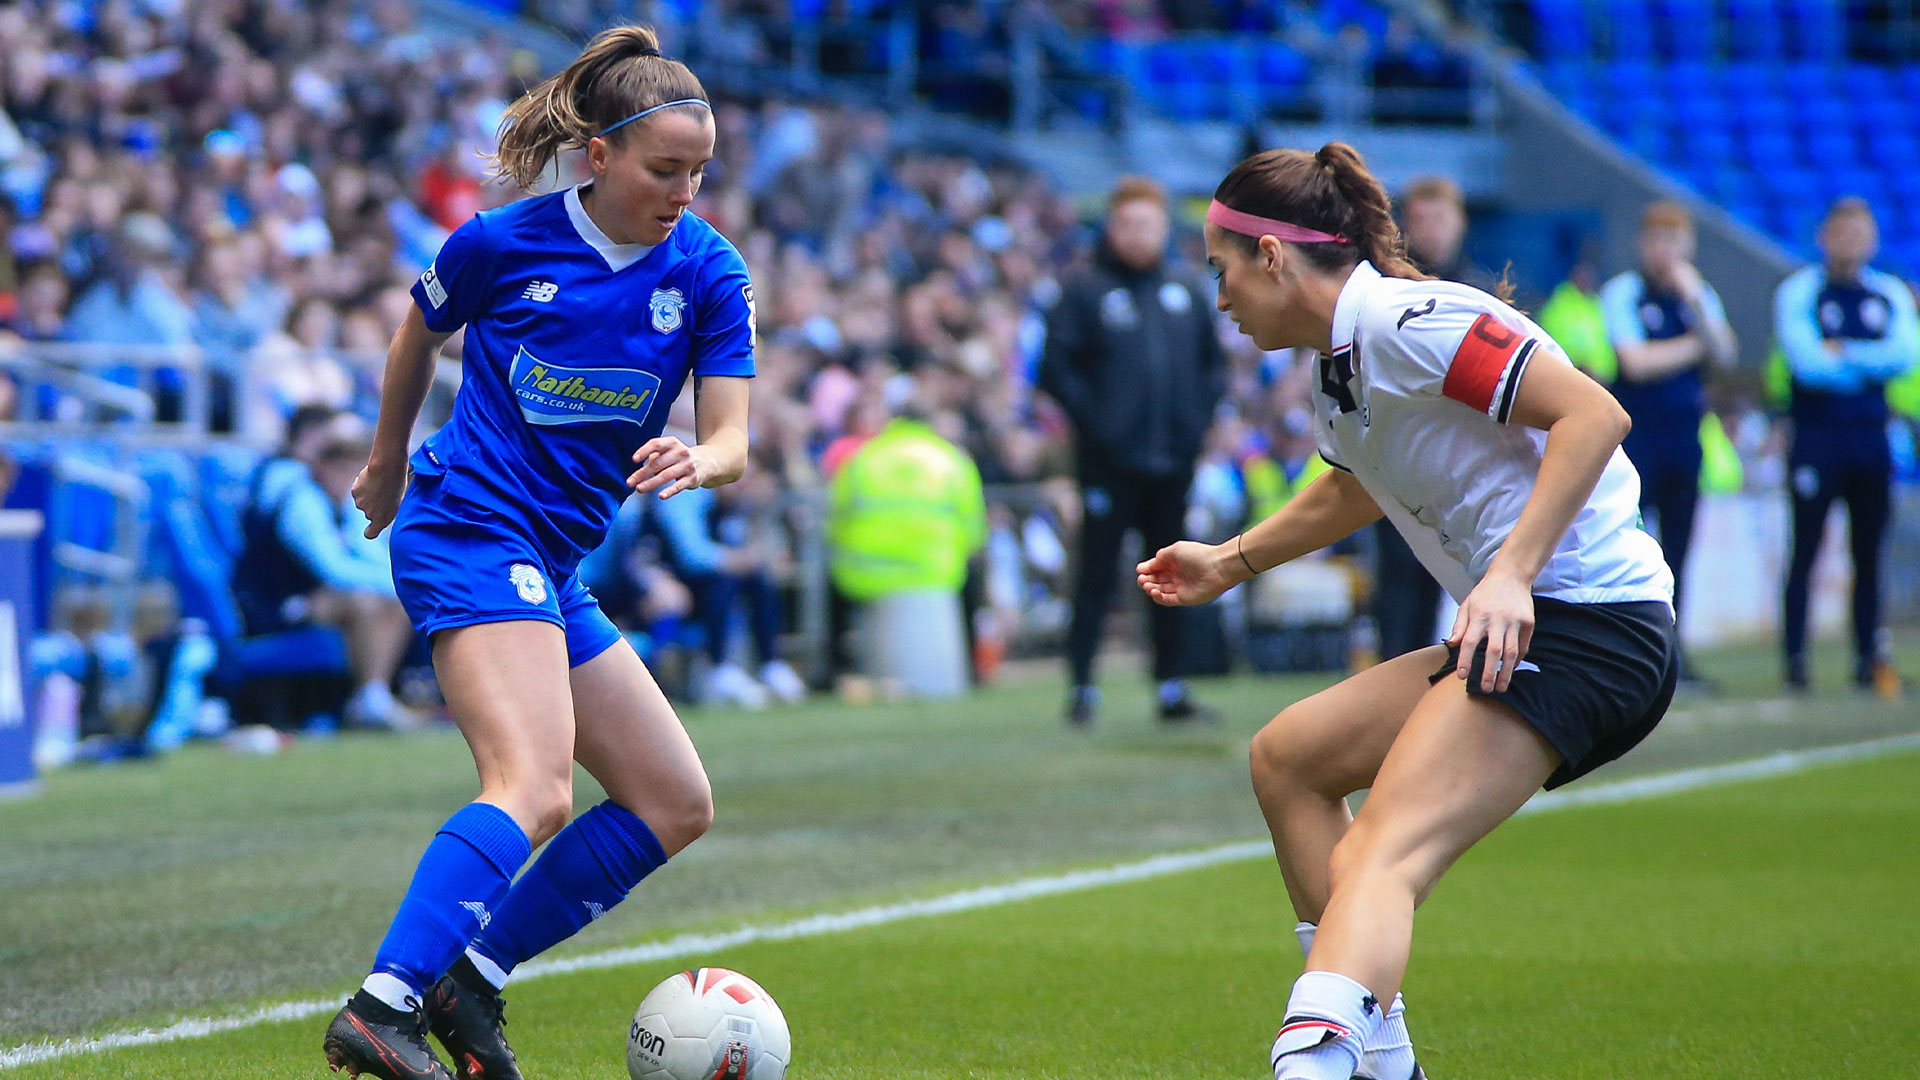 Lisa Owen in action for Cardiff City Women